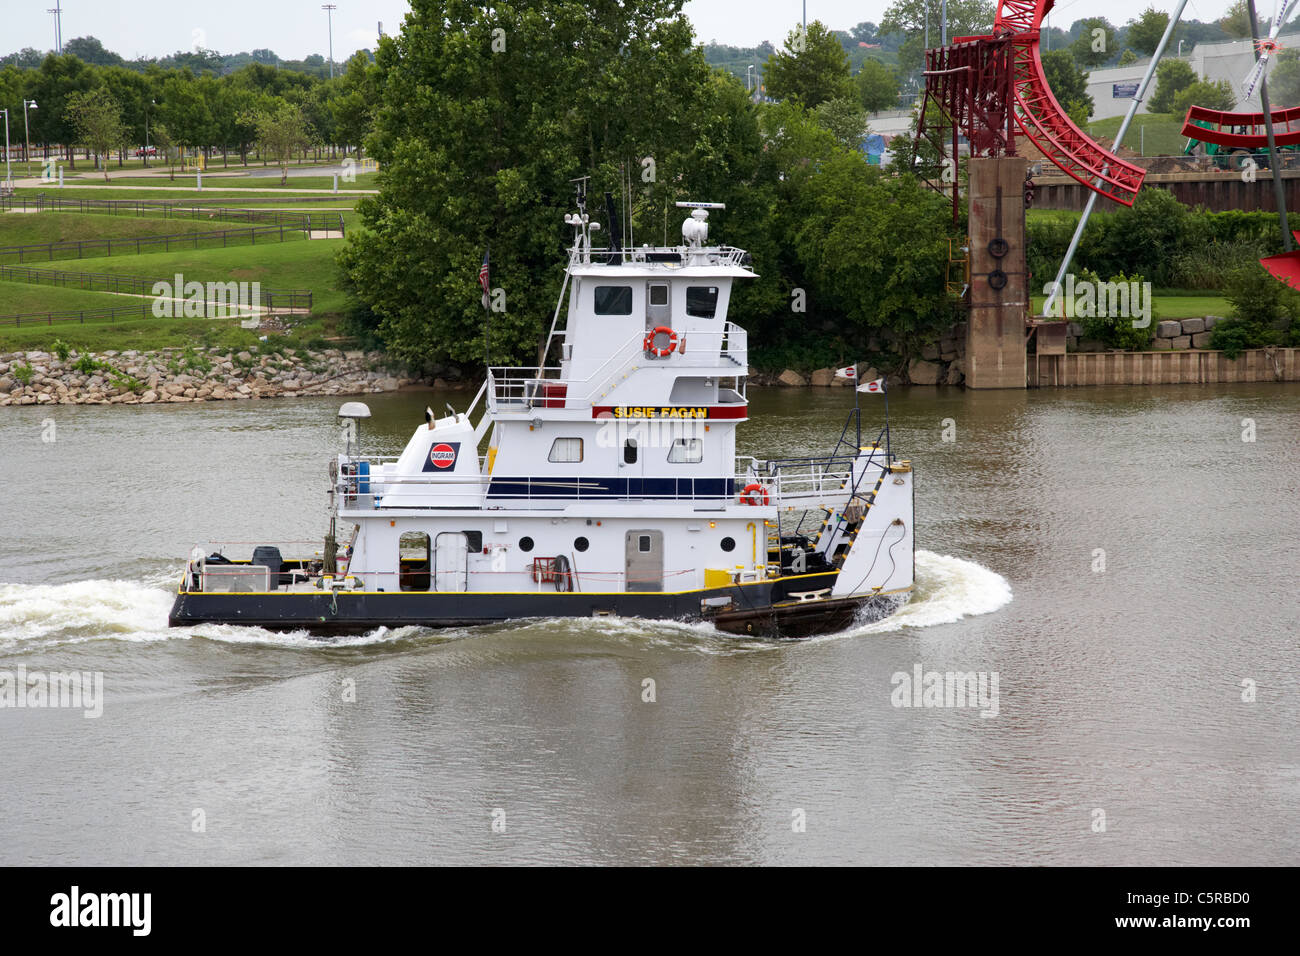 Susie Fagan towboat on the cumberland river Nashville Tennessee USA Foto Stock